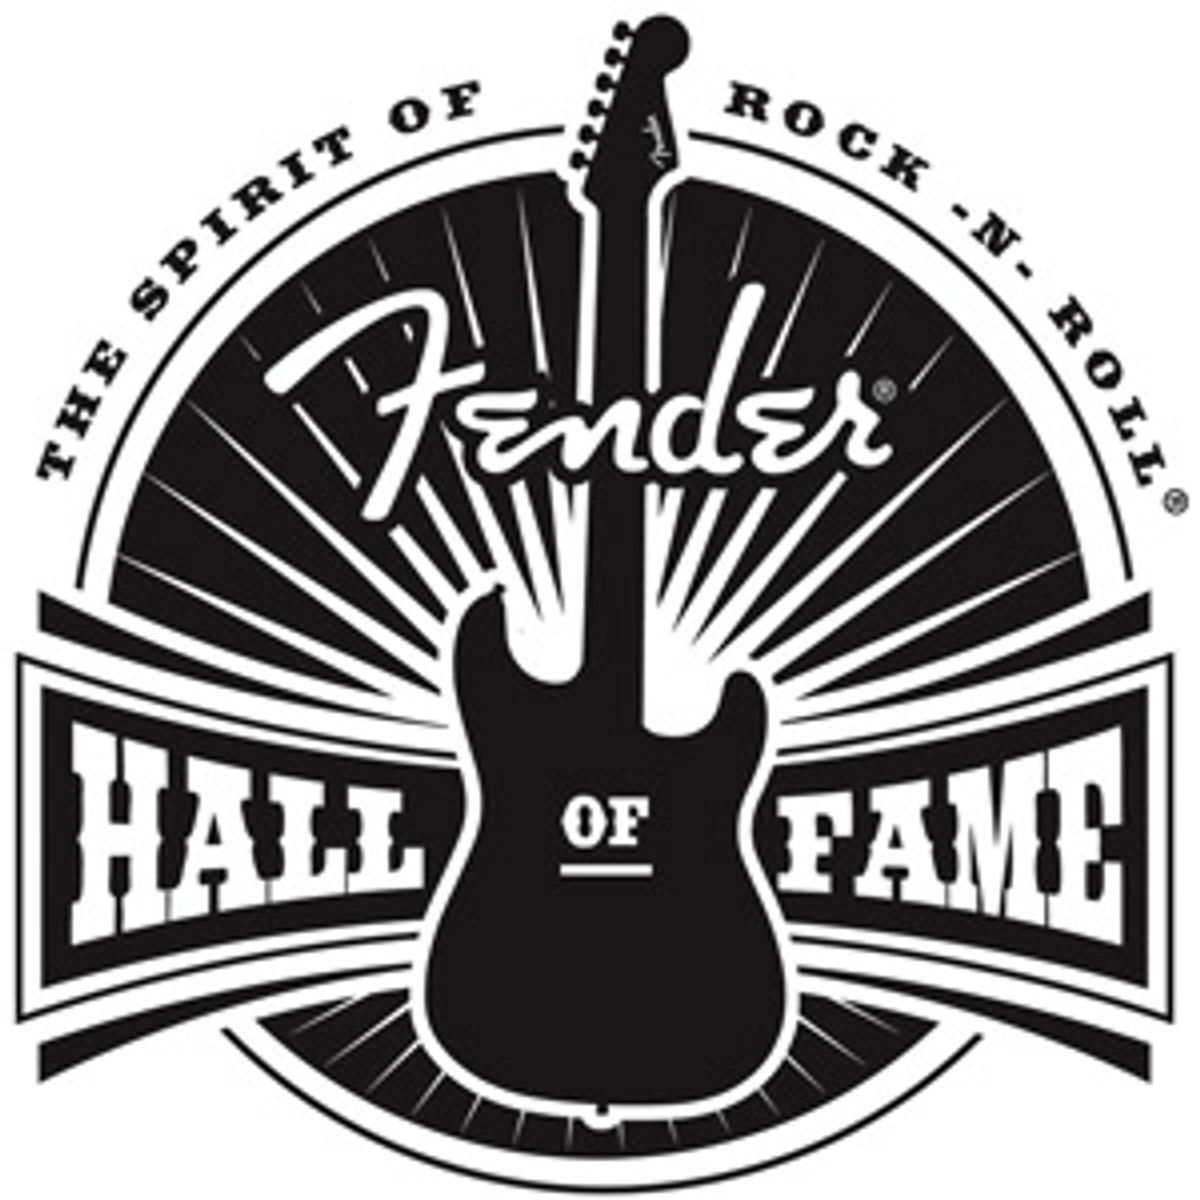 Jimi Hendrix and George Fullerton to be Inducted into Fender Hall of Fame